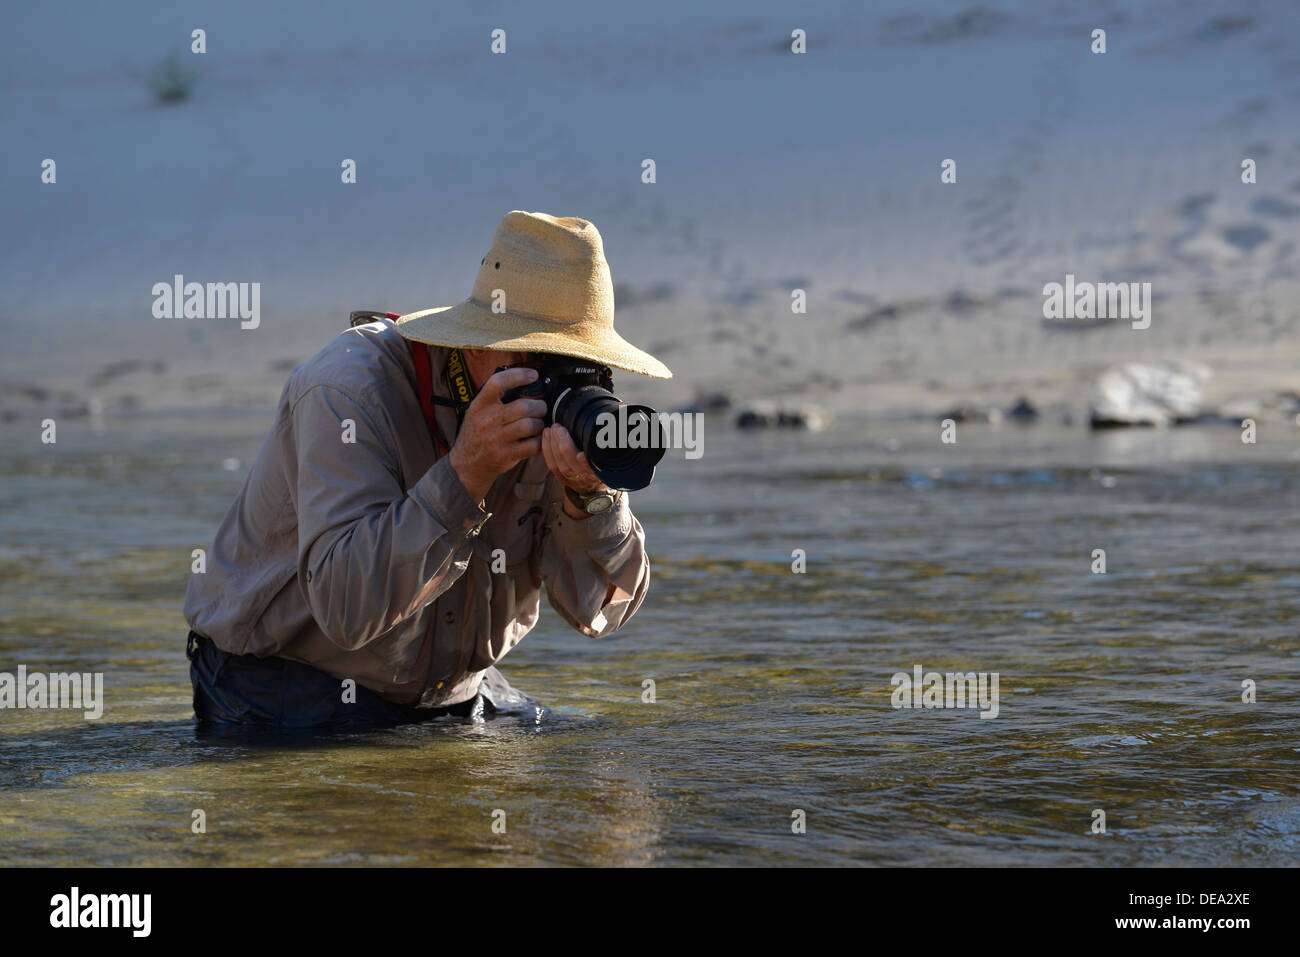 Photographer taking a picture while partially immersed in the Snake River, Hells Canyon, Oregon/Idaho. Stock Photo